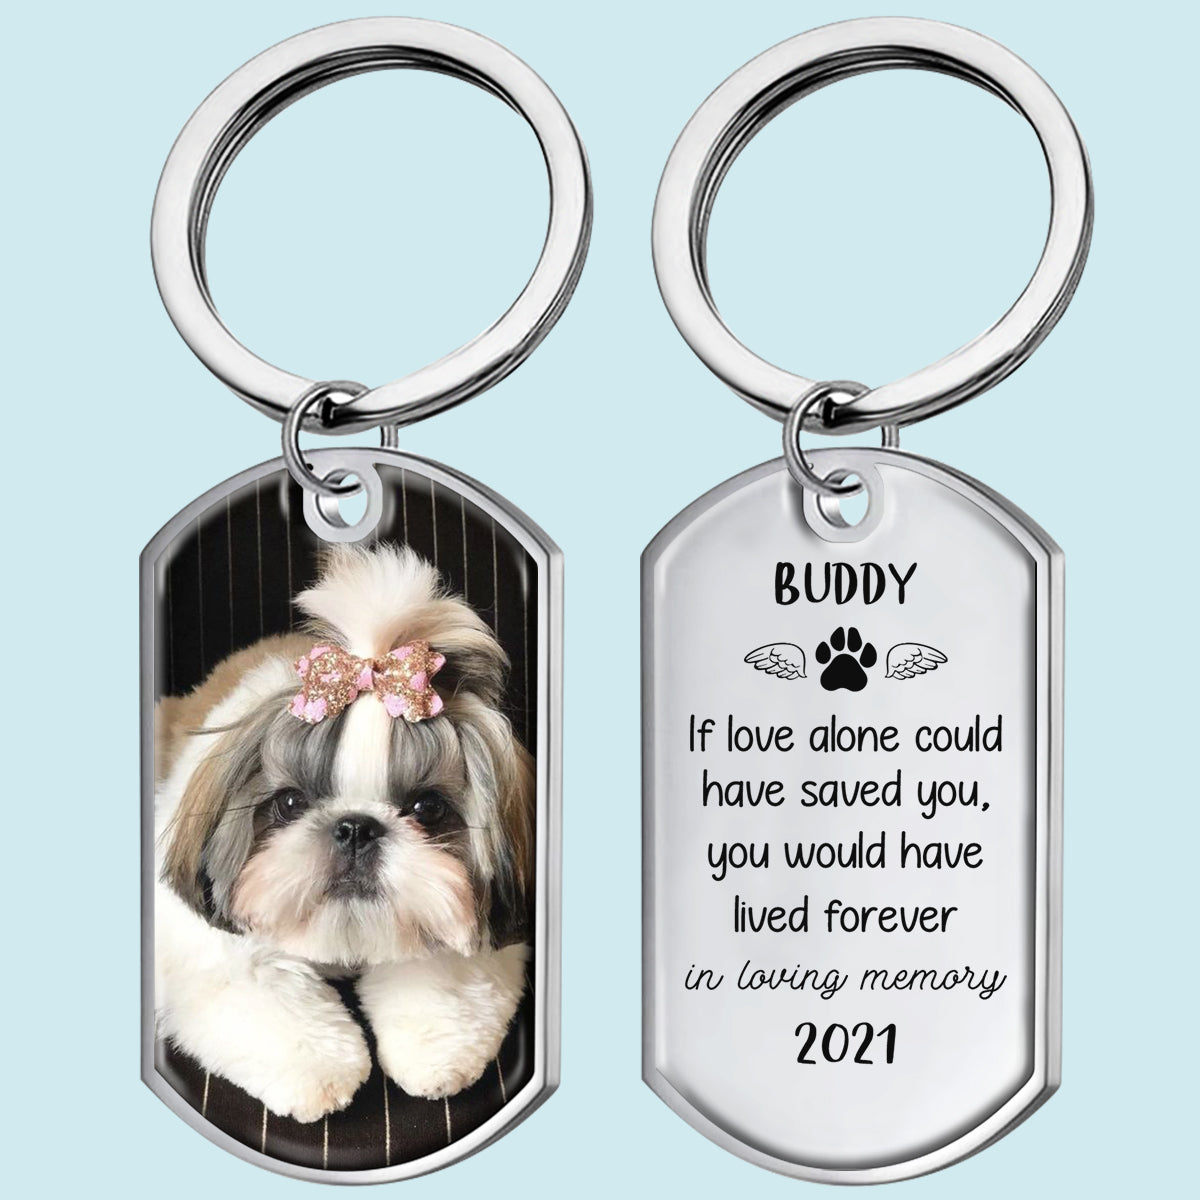 I Loved You Your Whole Life - Dog Memorial Keychain – Memorial